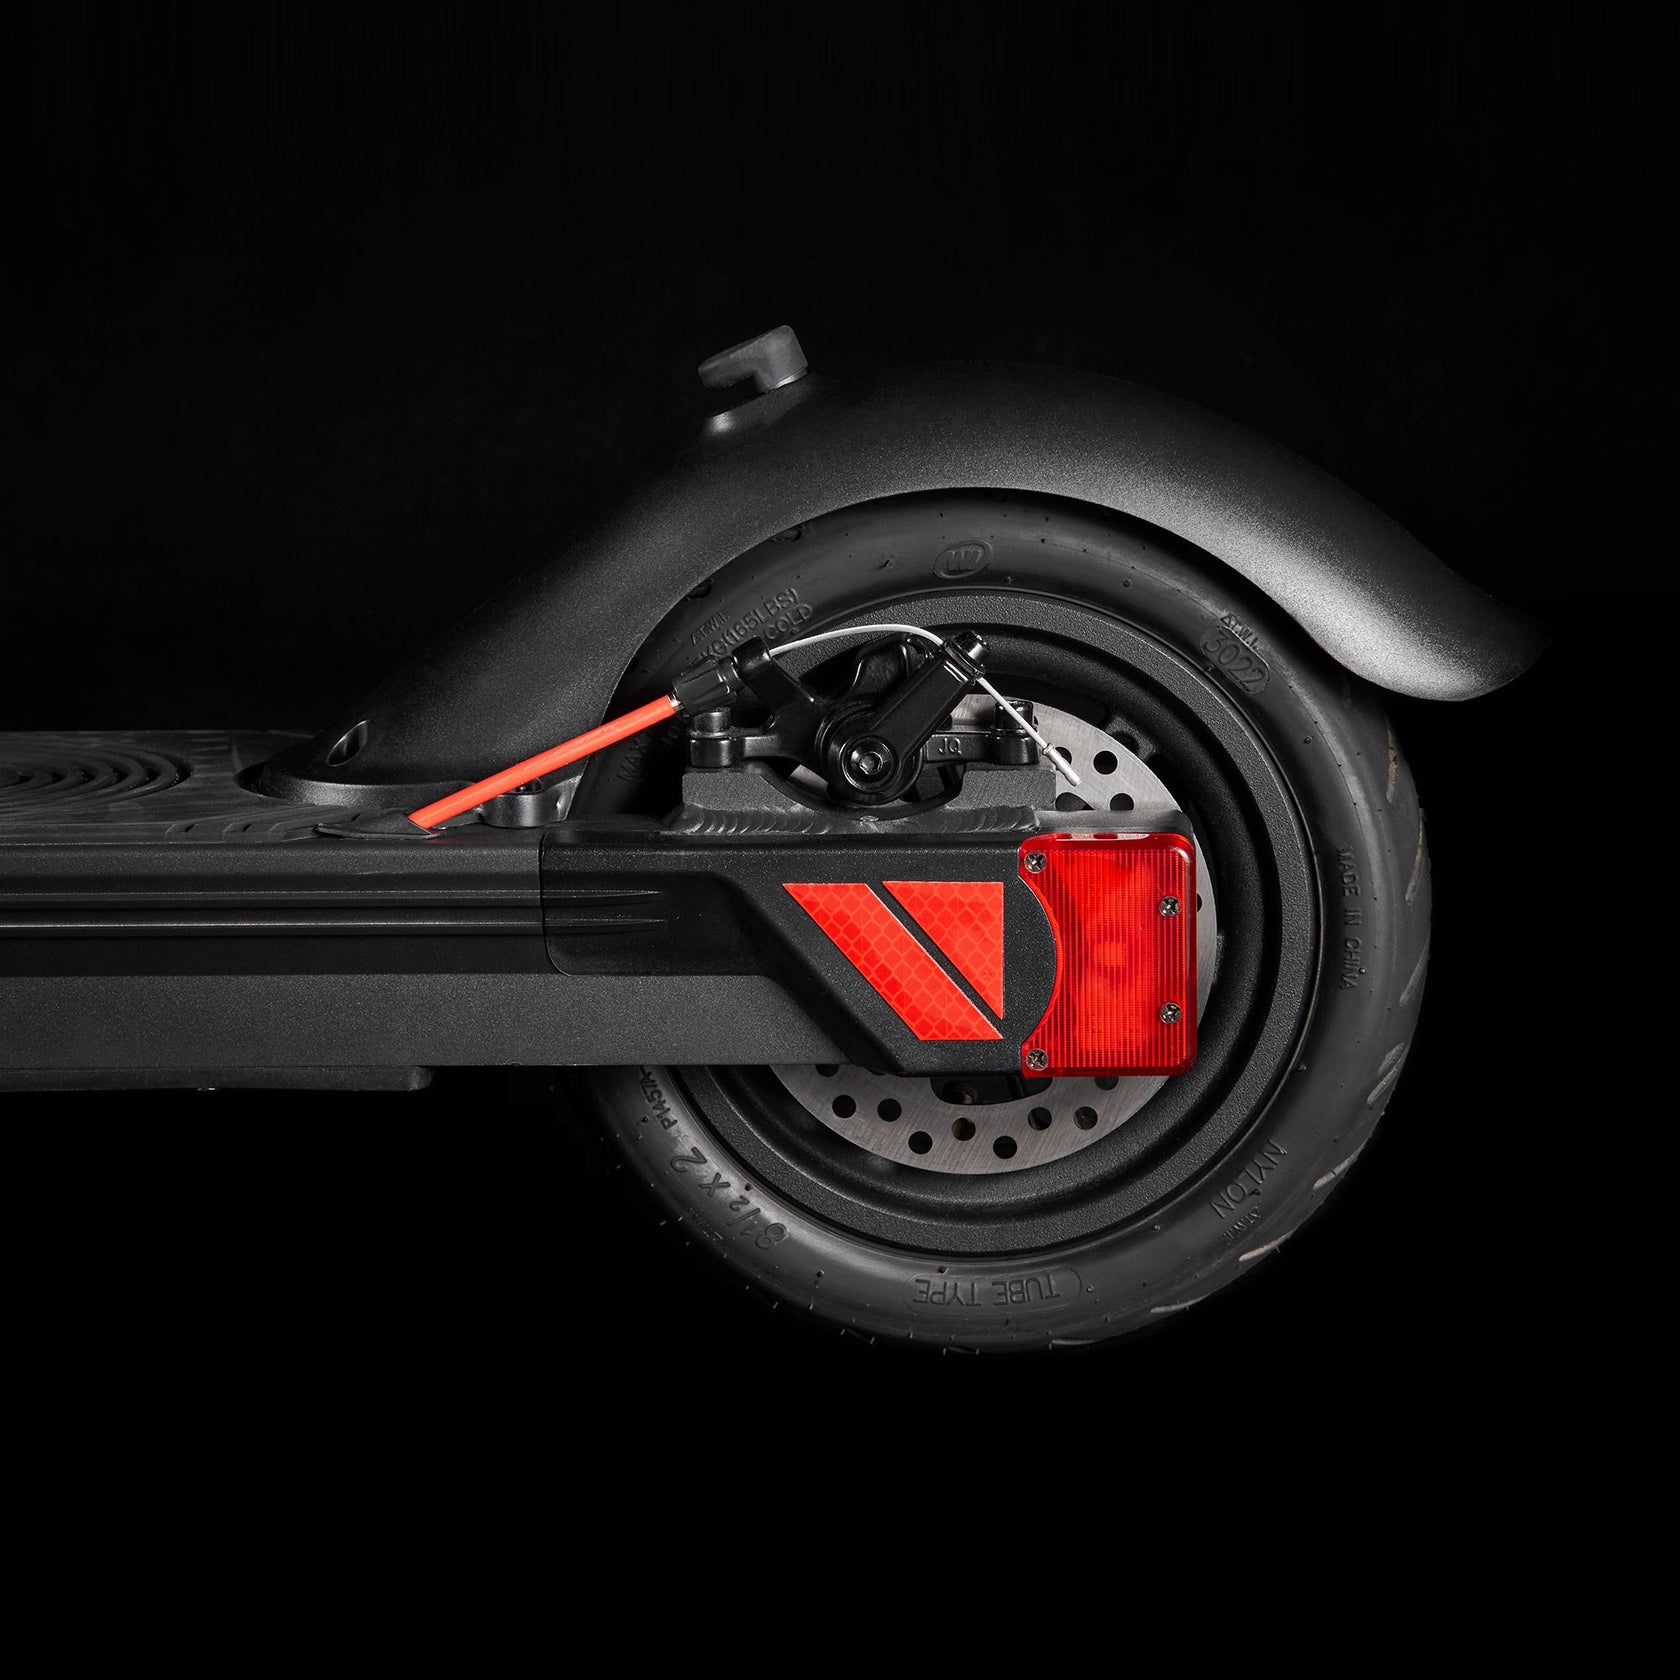 TurboAnt M10 Lite Commuting Electric Scooter